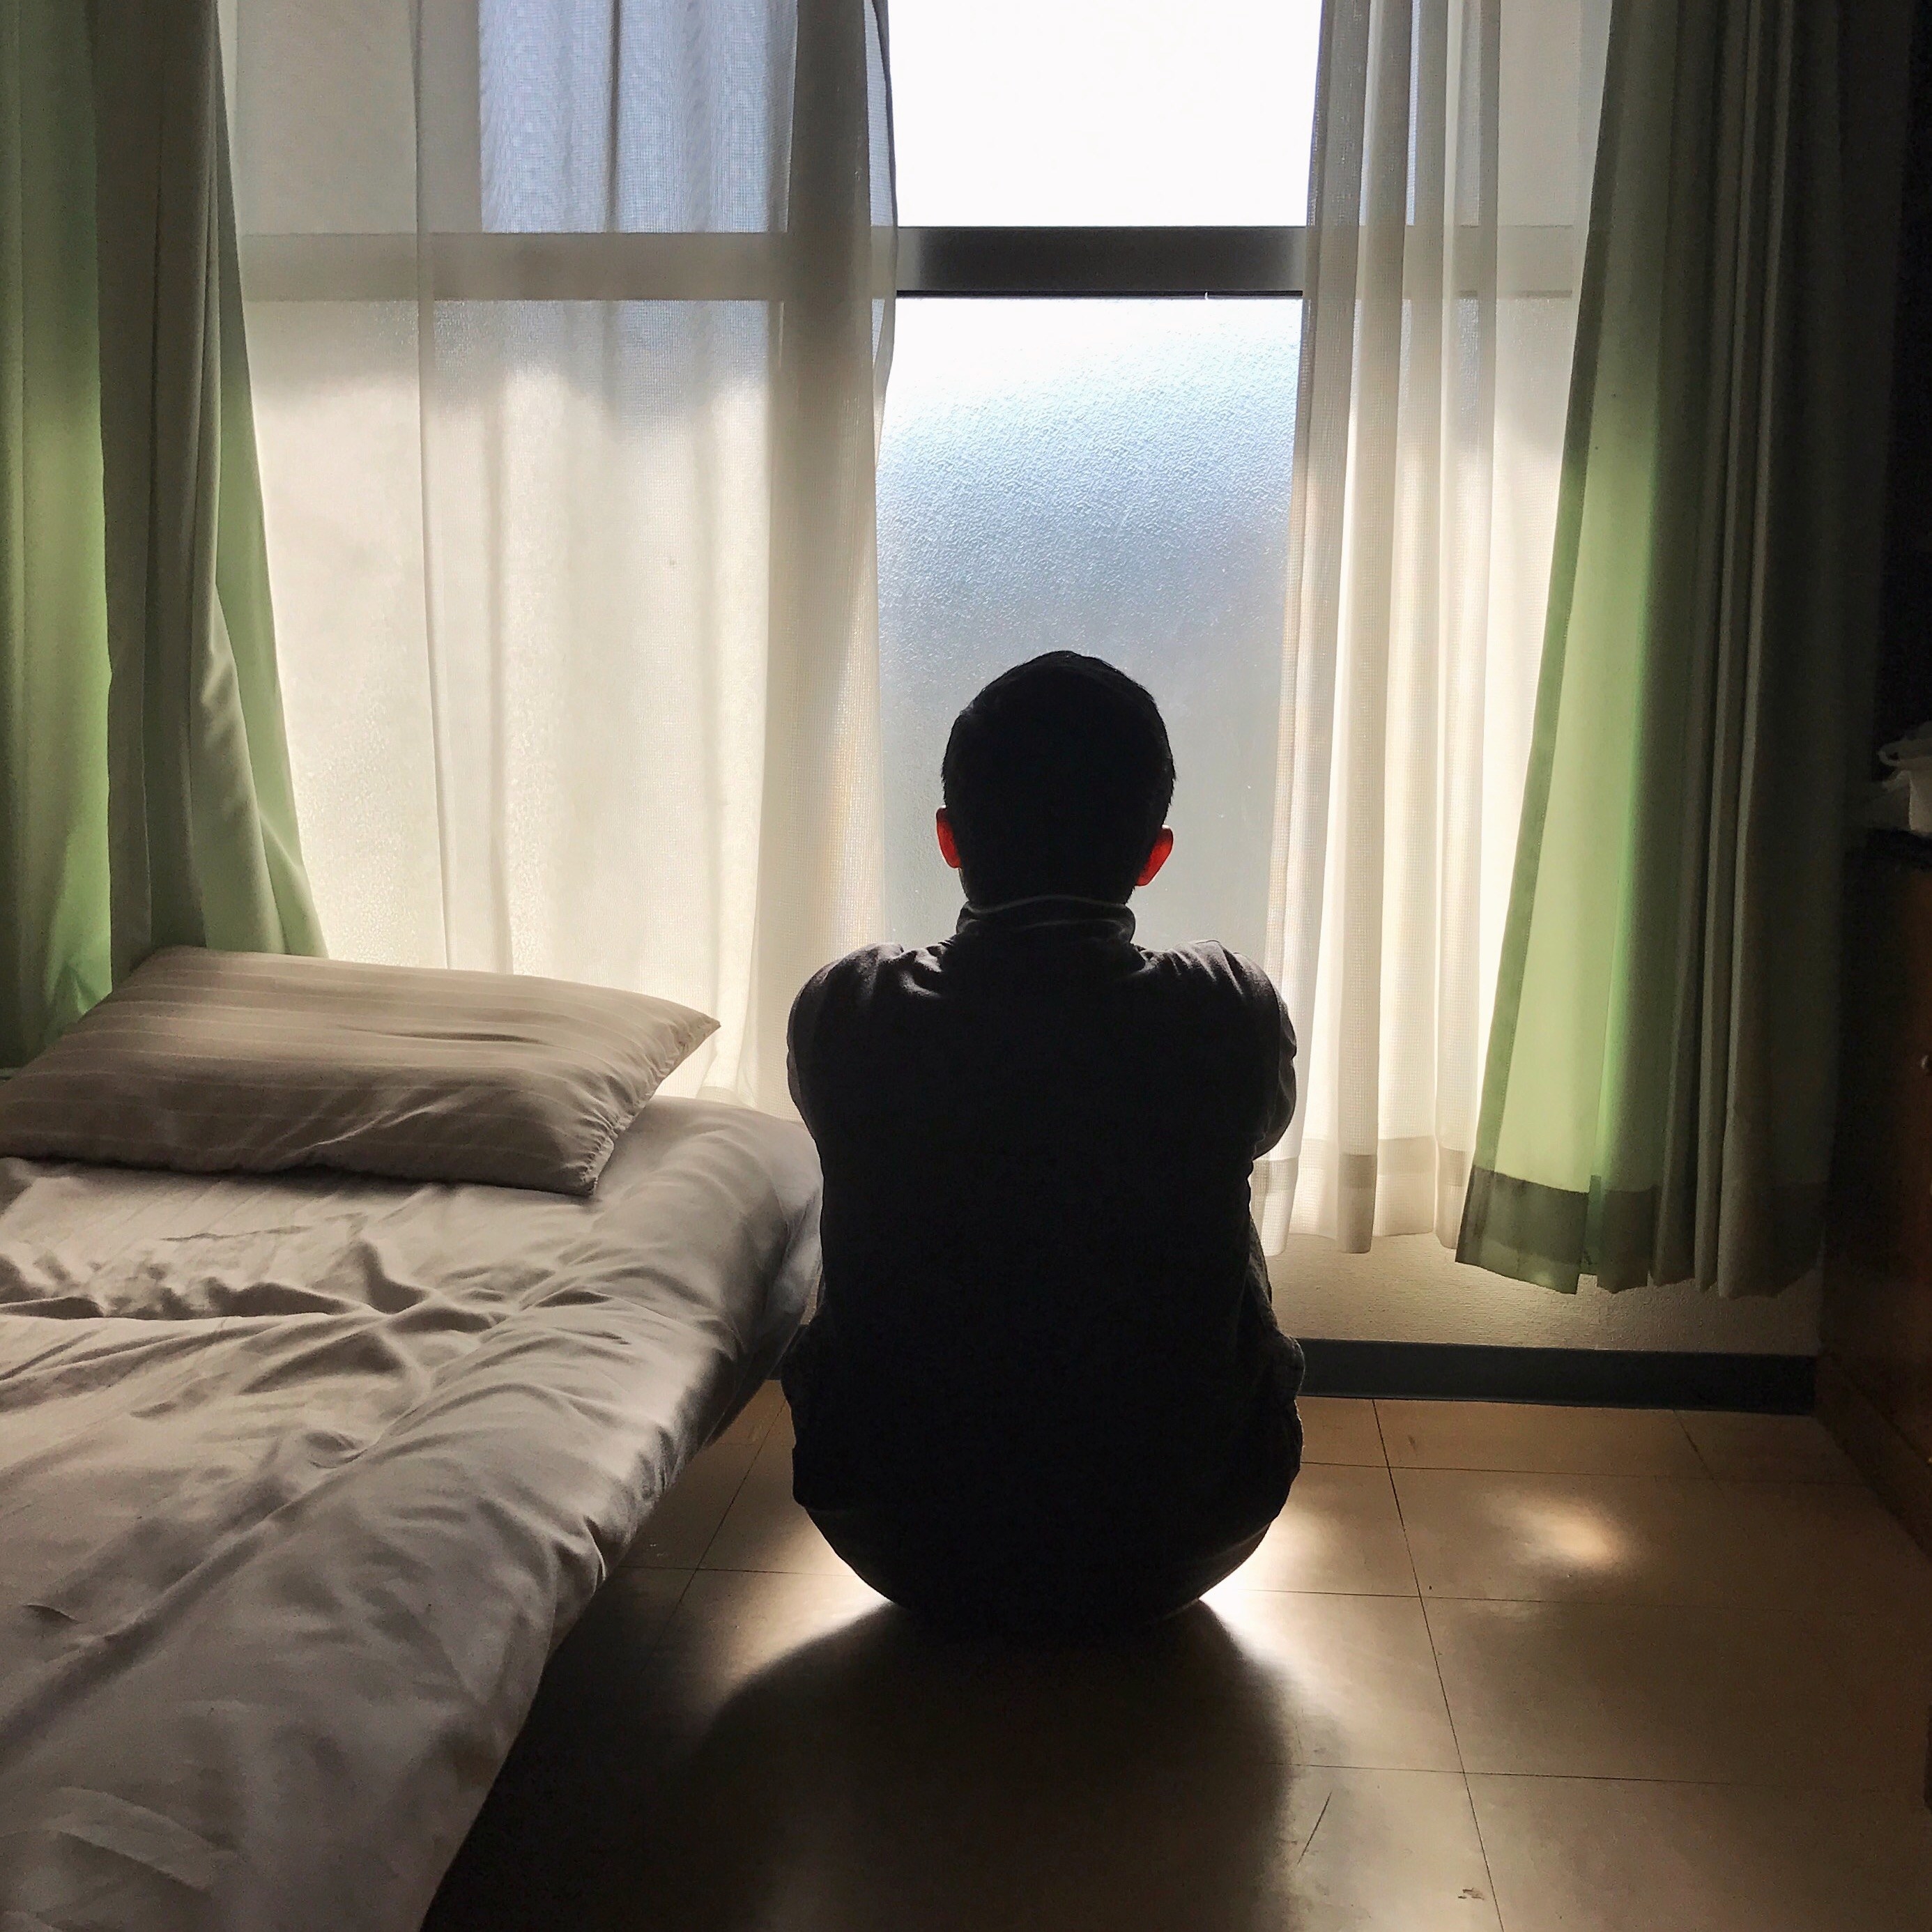 A boy looks out a window next to a bed